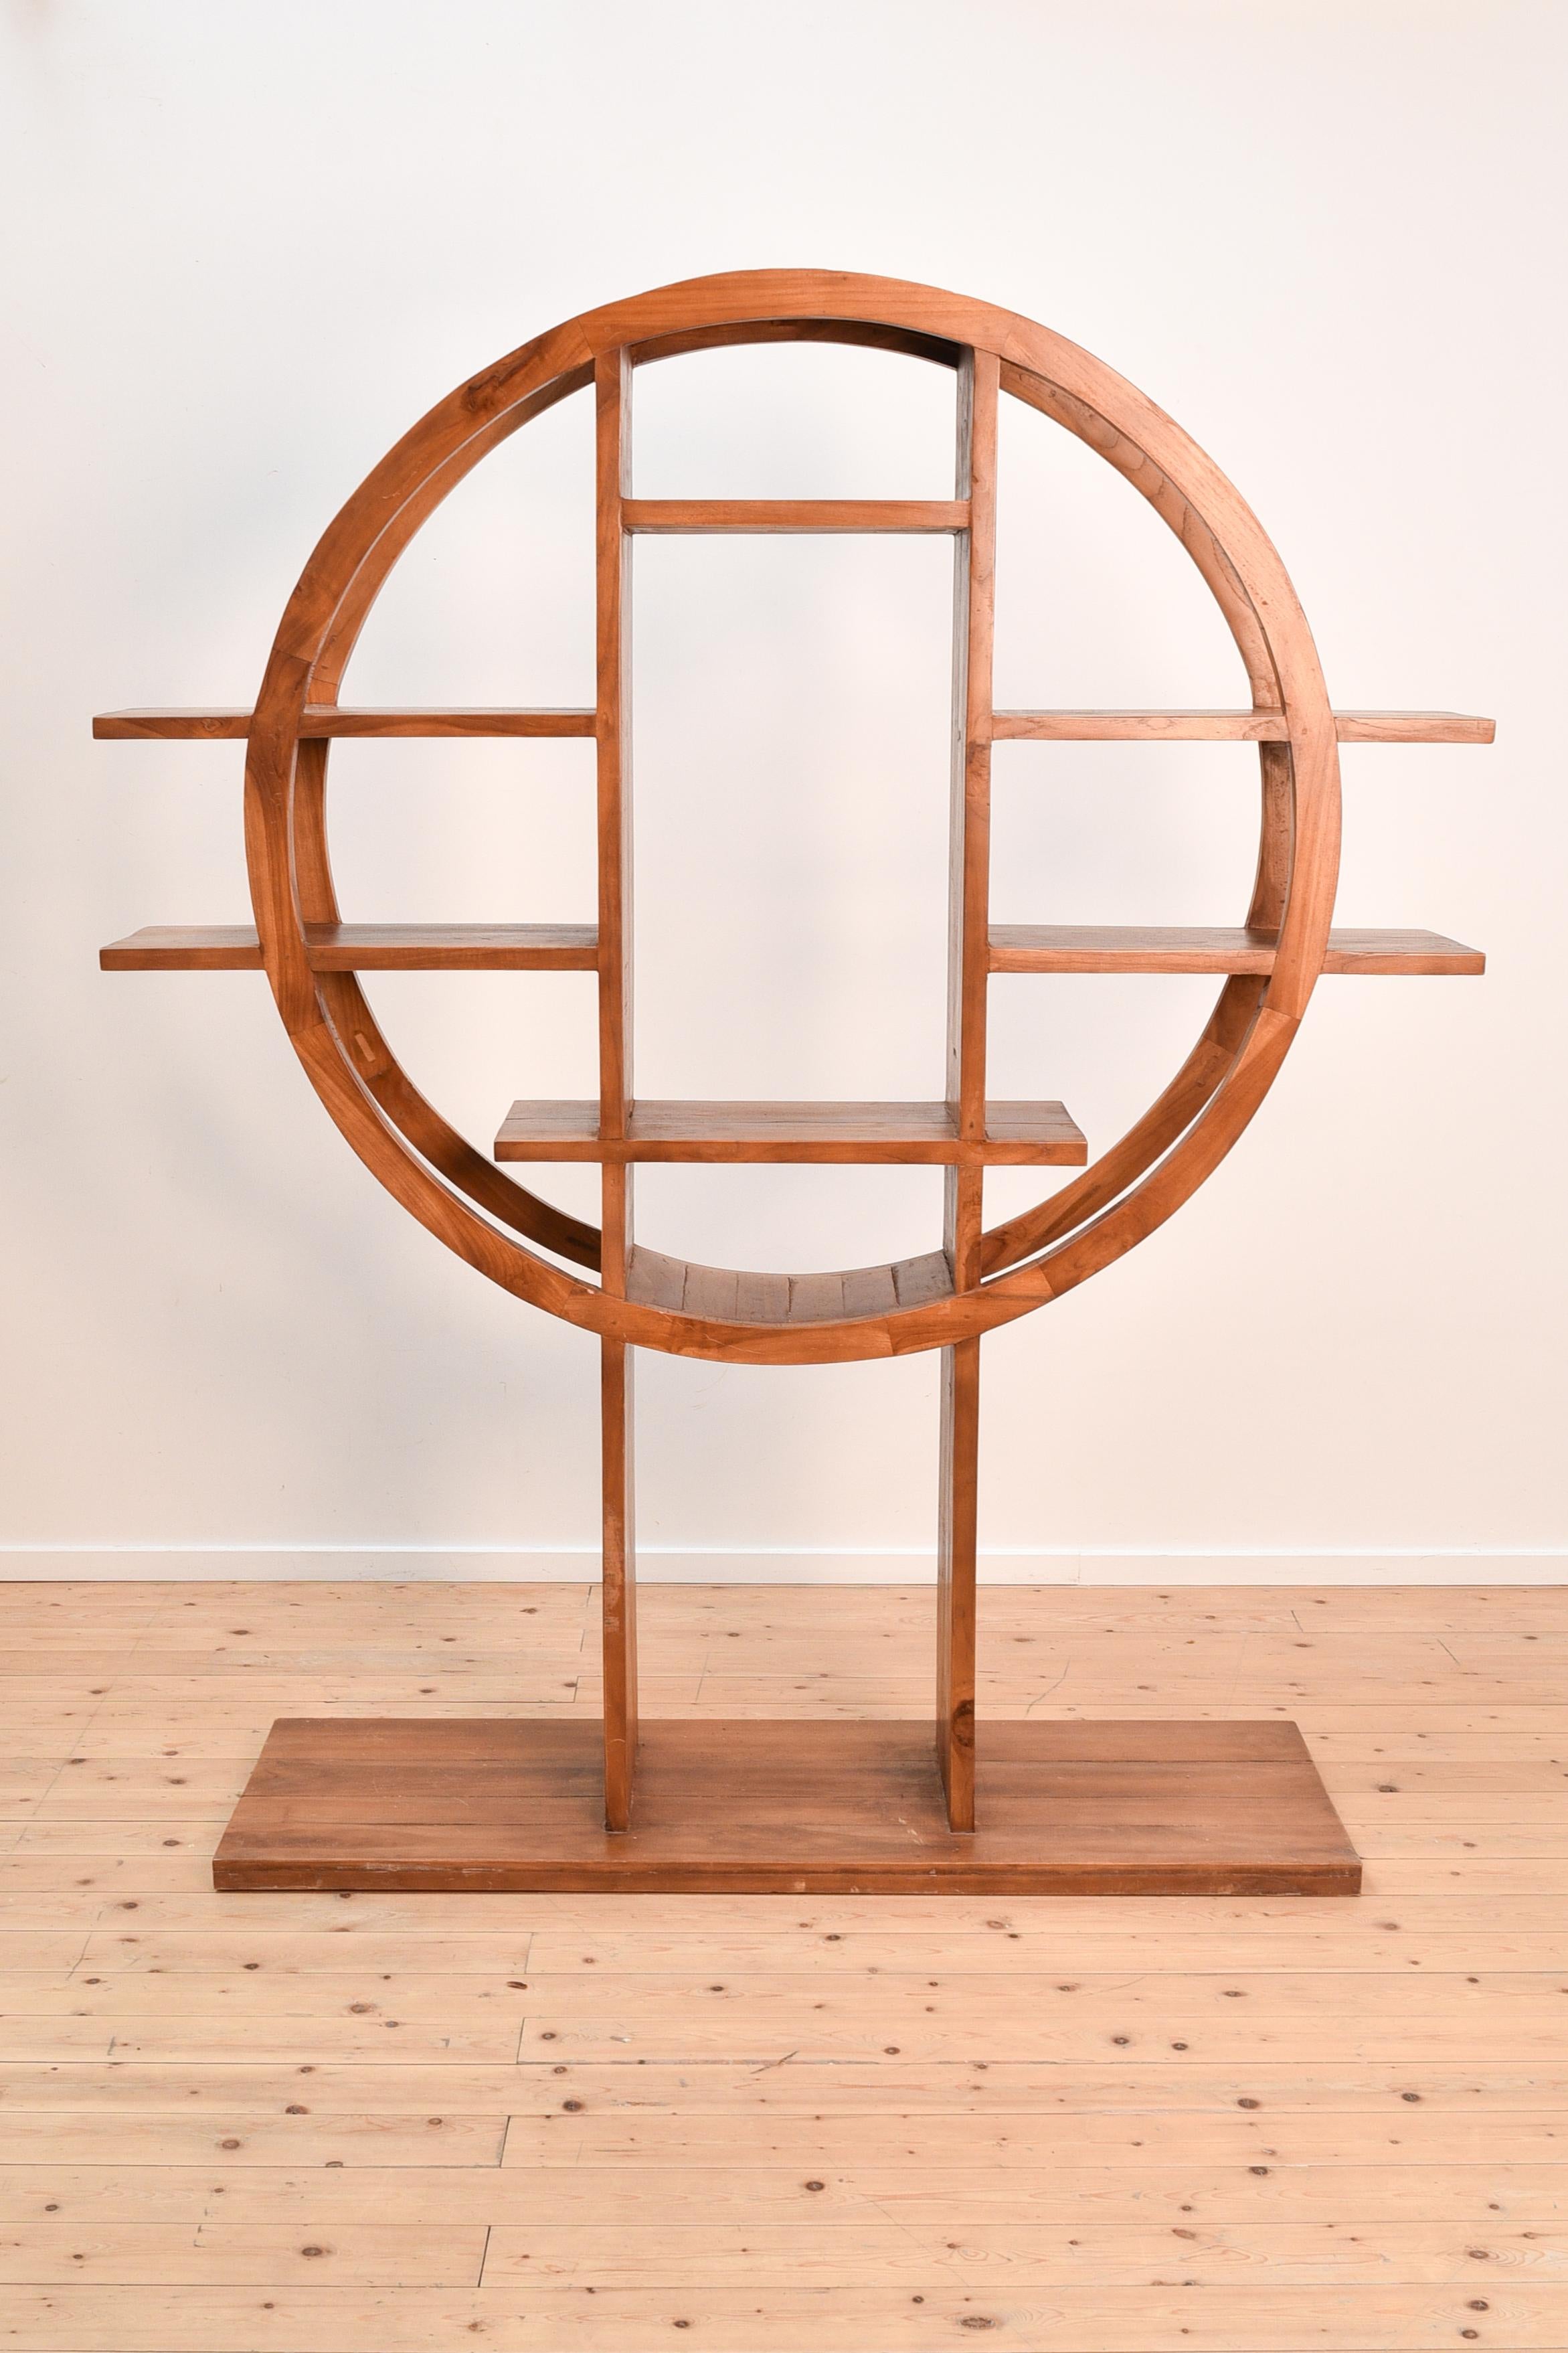 Circle-shaped book shelf in tropical wood. Can be used as room divider or simply to display books or decorative items. 